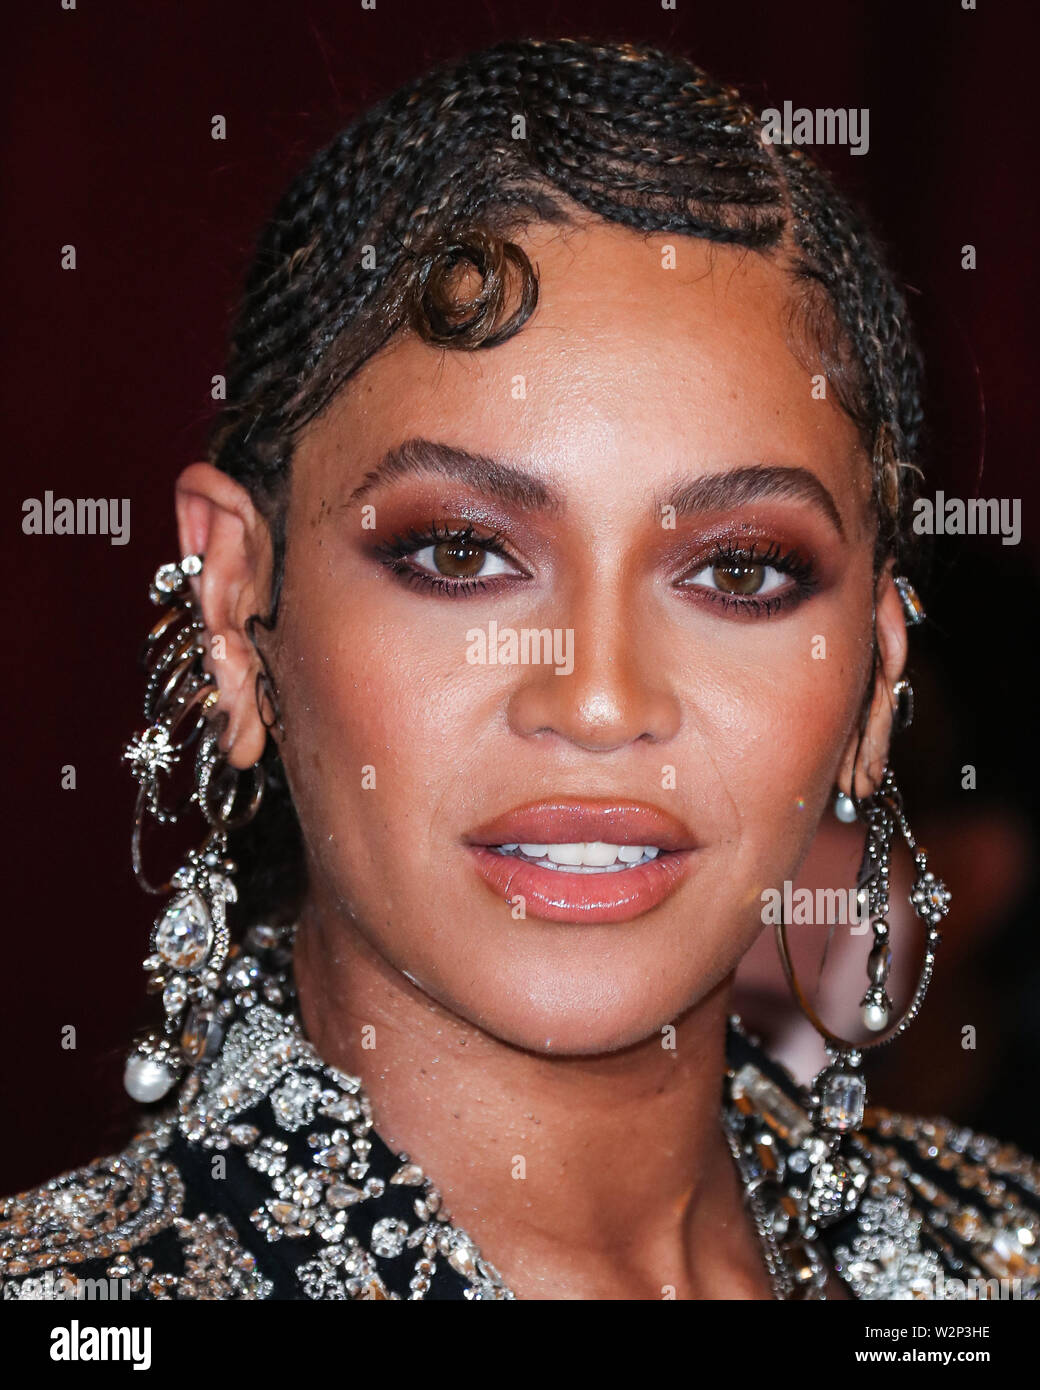 HOLLYWOOD, LOS ANGELES, CALIFORNIA, USA - JULY 09: Singer Beyonce Knowles Carter wearing an outfit by Alexander McQueen and Lorraine Schwartz jewelry arrives at the World Premiere Of Disney's 'The Lion King' held at the Dolby Theatre on July 9, 2019 in Hollywood, Los Angeles, California, United States. (Photo by Xavier Collin/Image Press Agency) Stock Photo